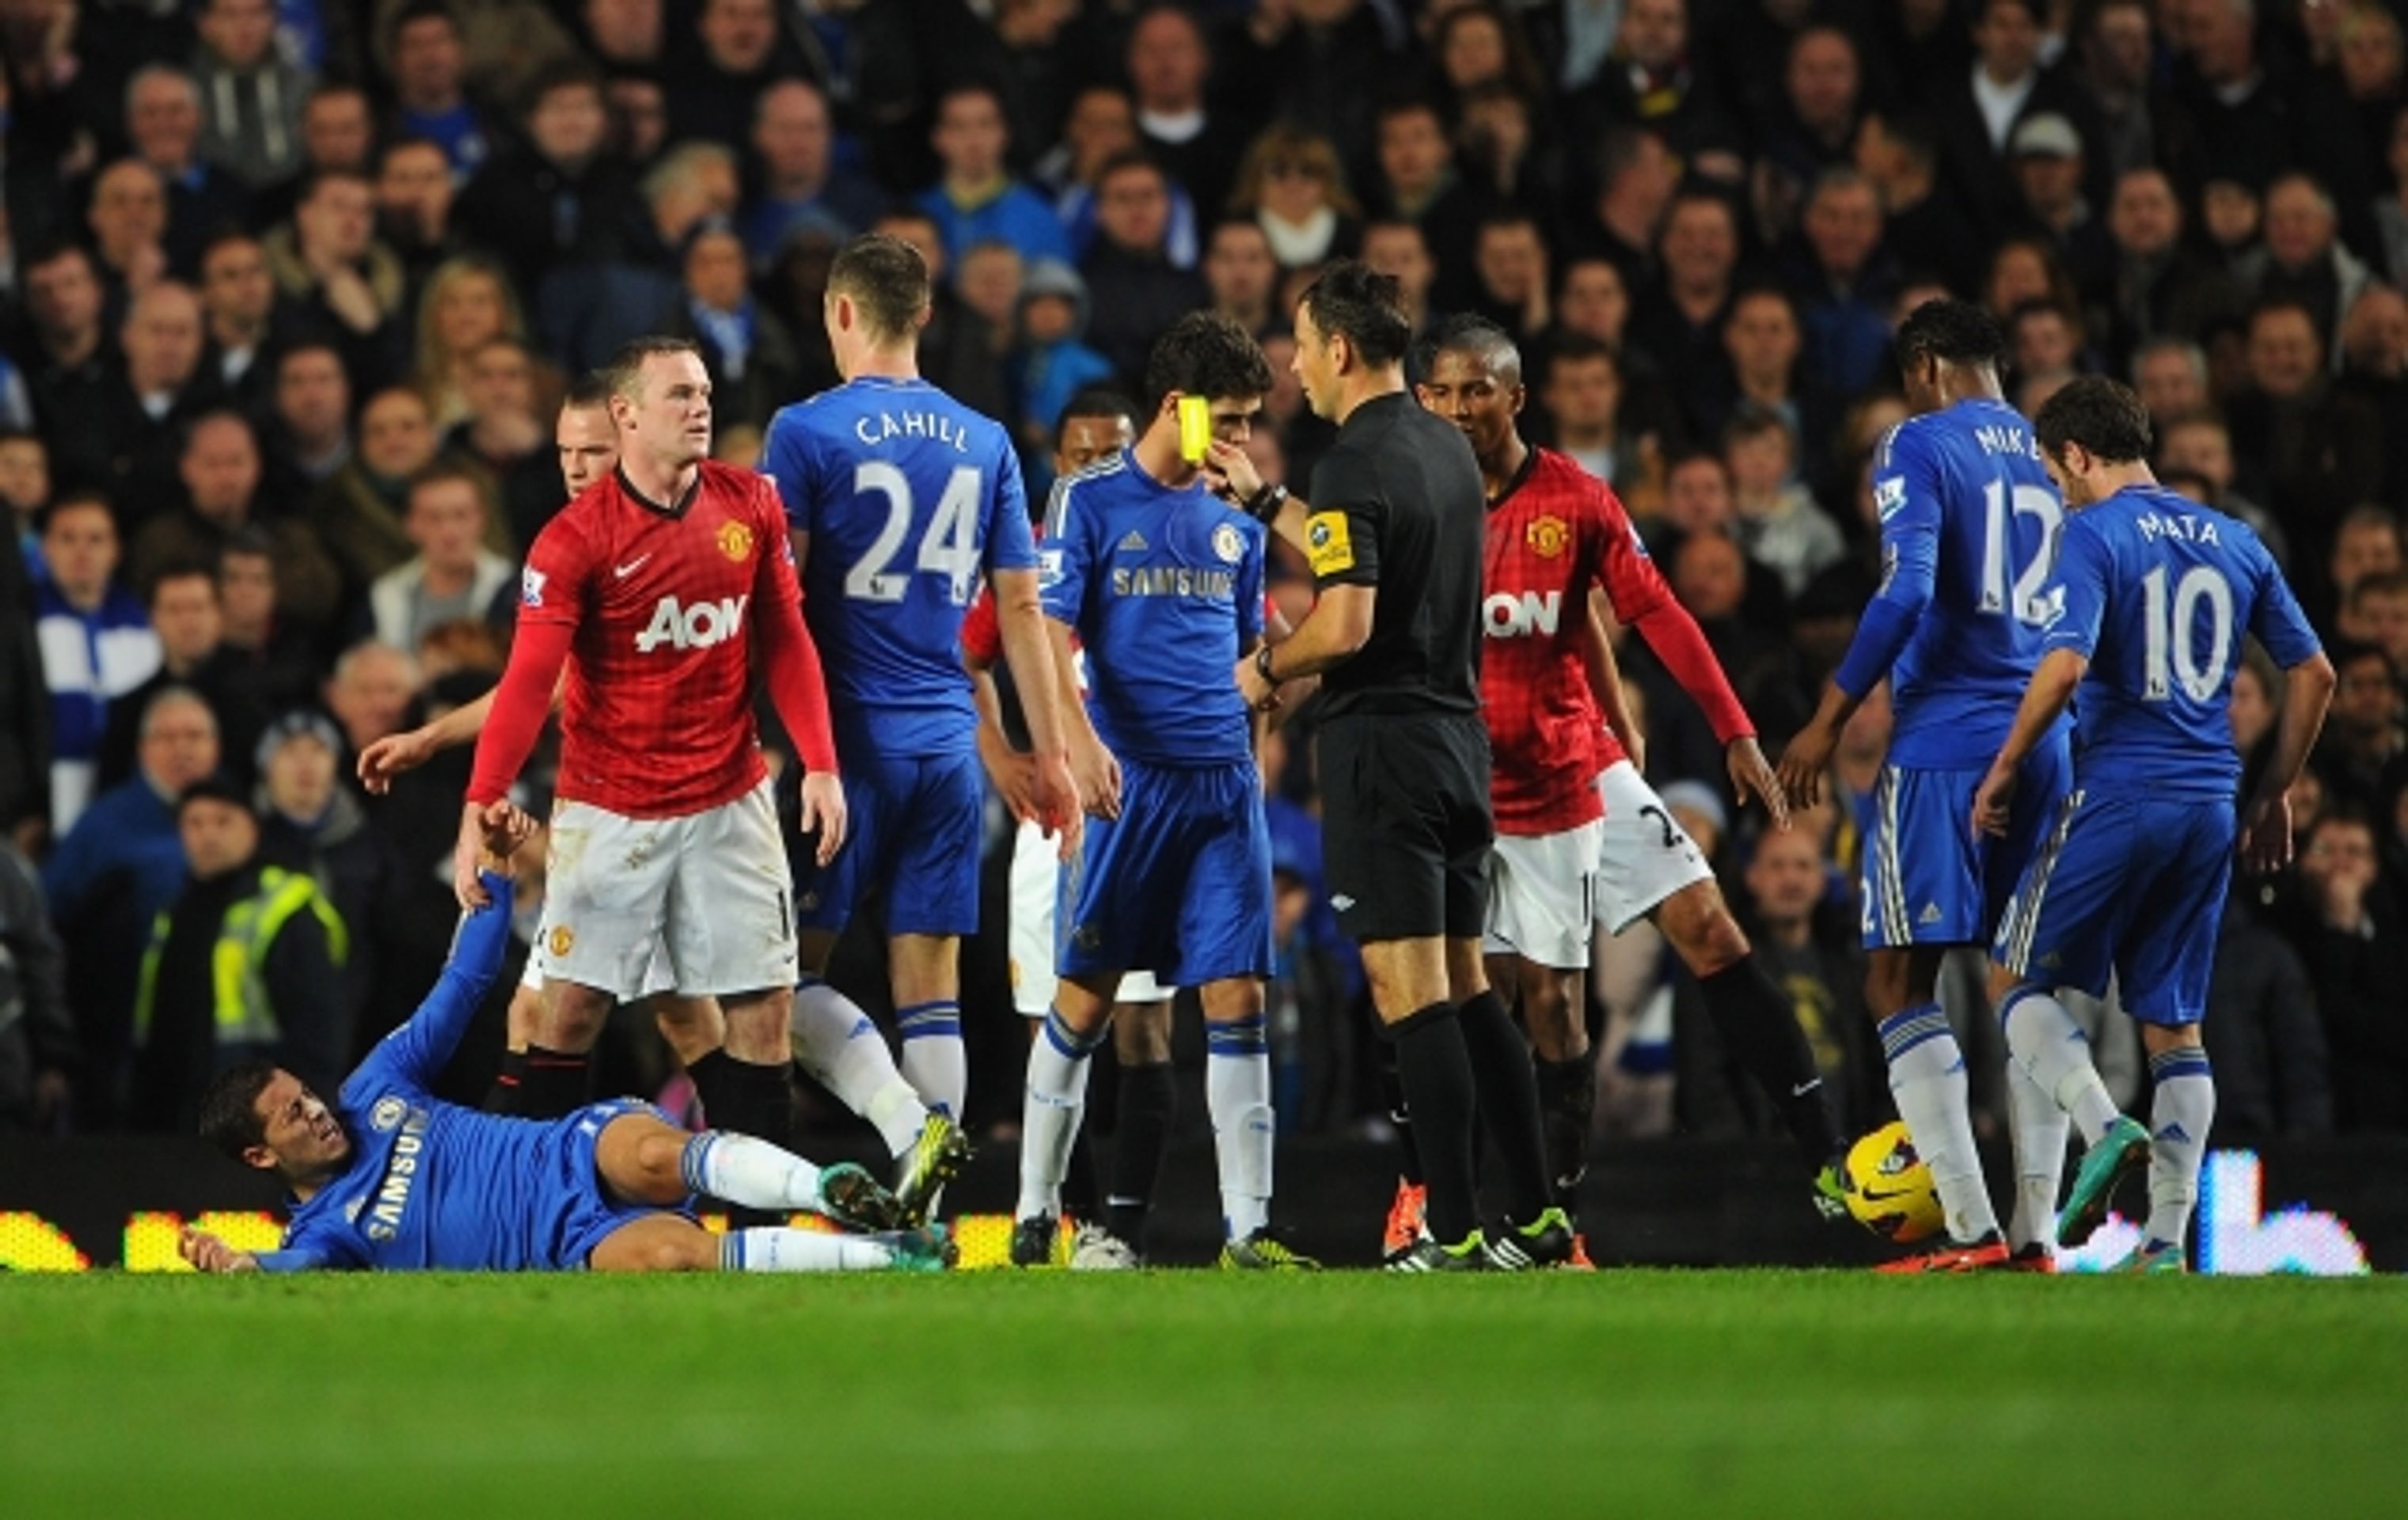 Chelsea - Manchester United 5 - GALERIE Chelsea - Manchester United 2:3 (5/13)